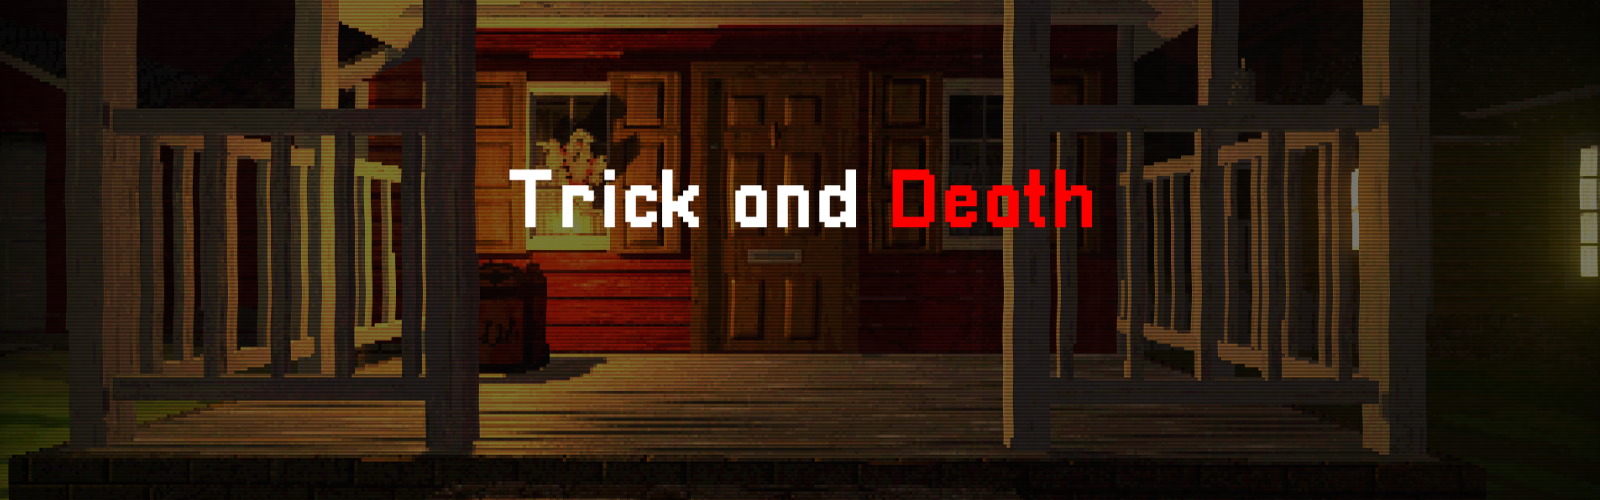 Trick and Death